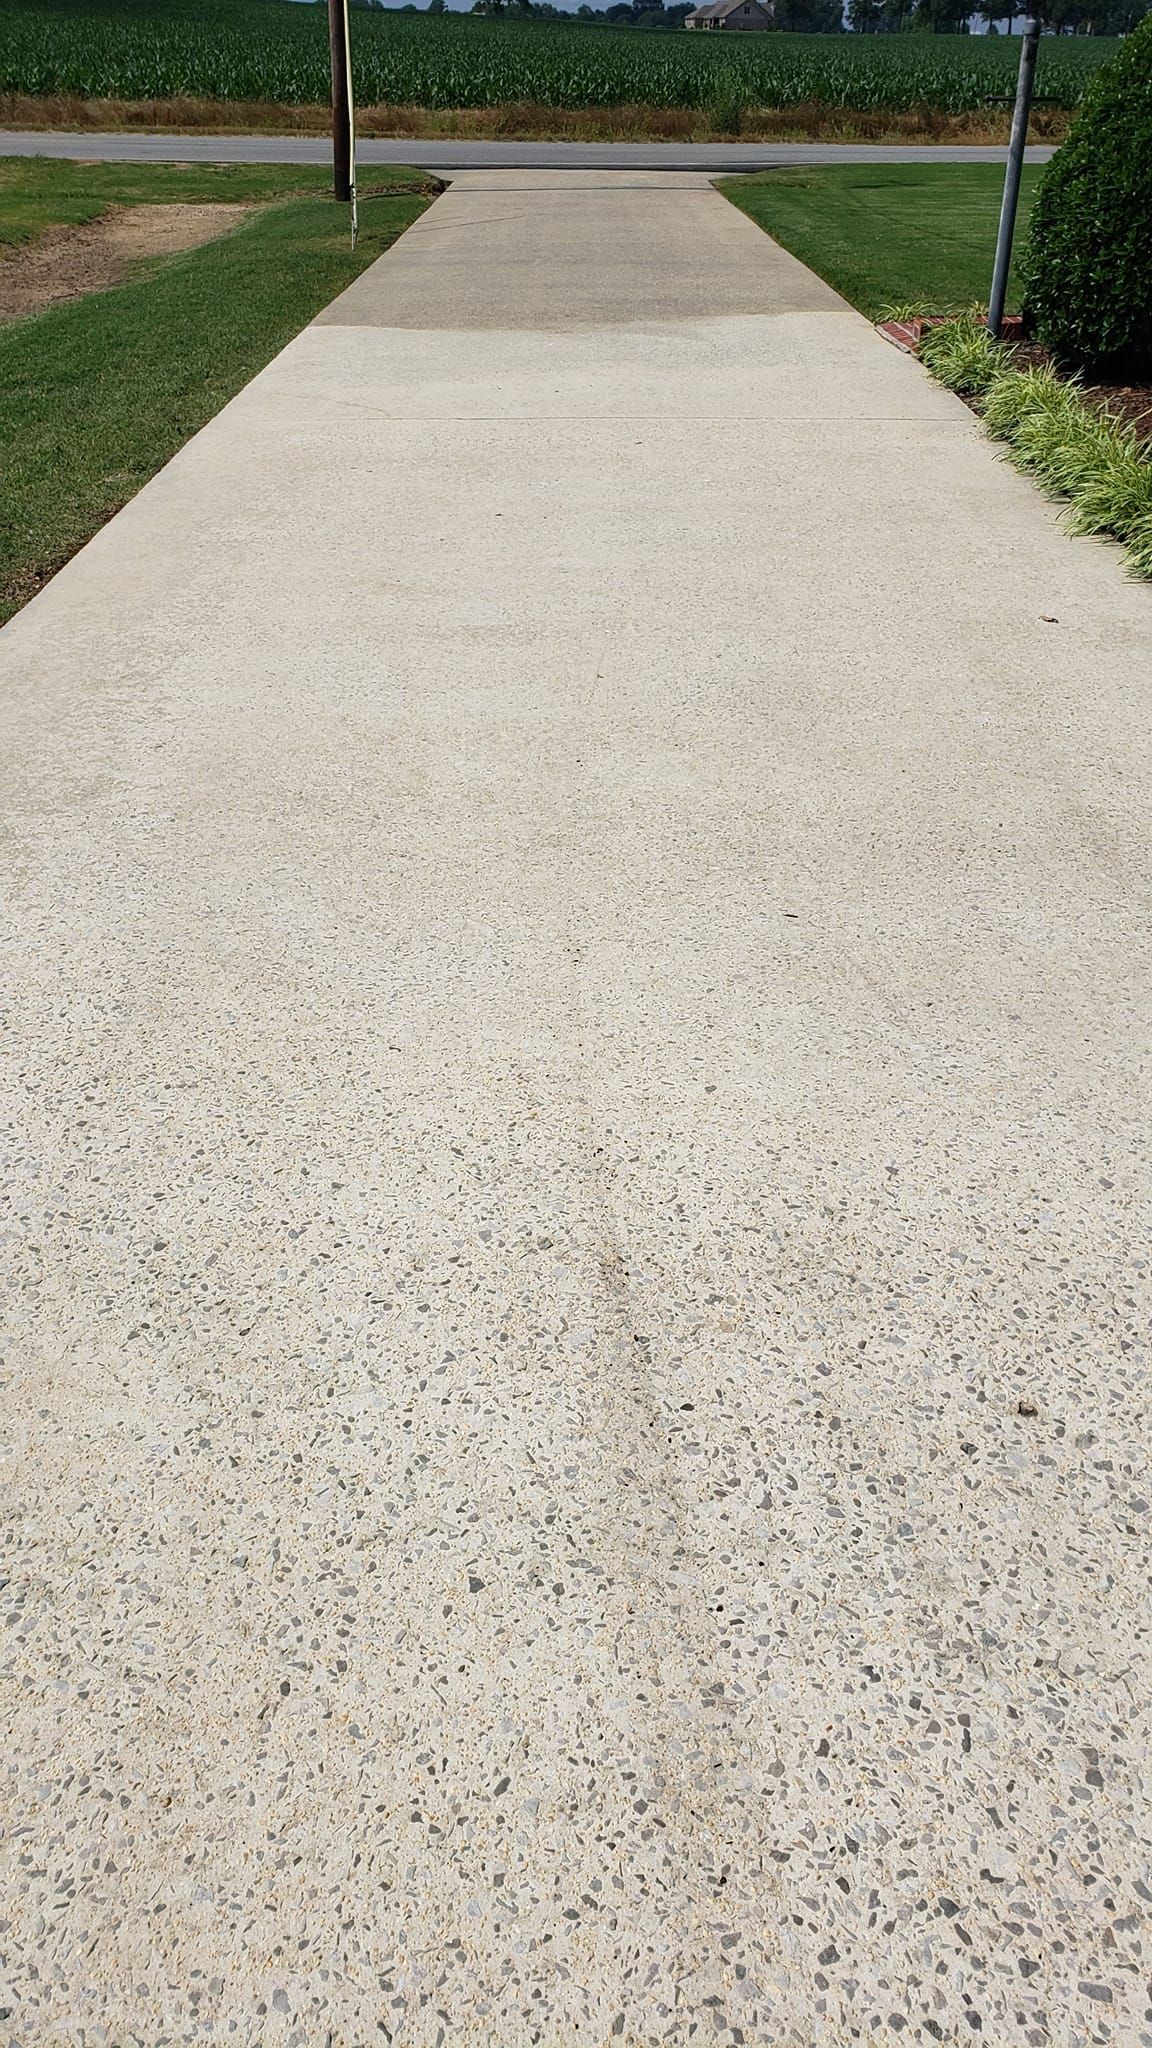 After Power Washing Driveway In Front of Field and Utility Pole | Harvest, AL | Radiant Exterior Cleaning 